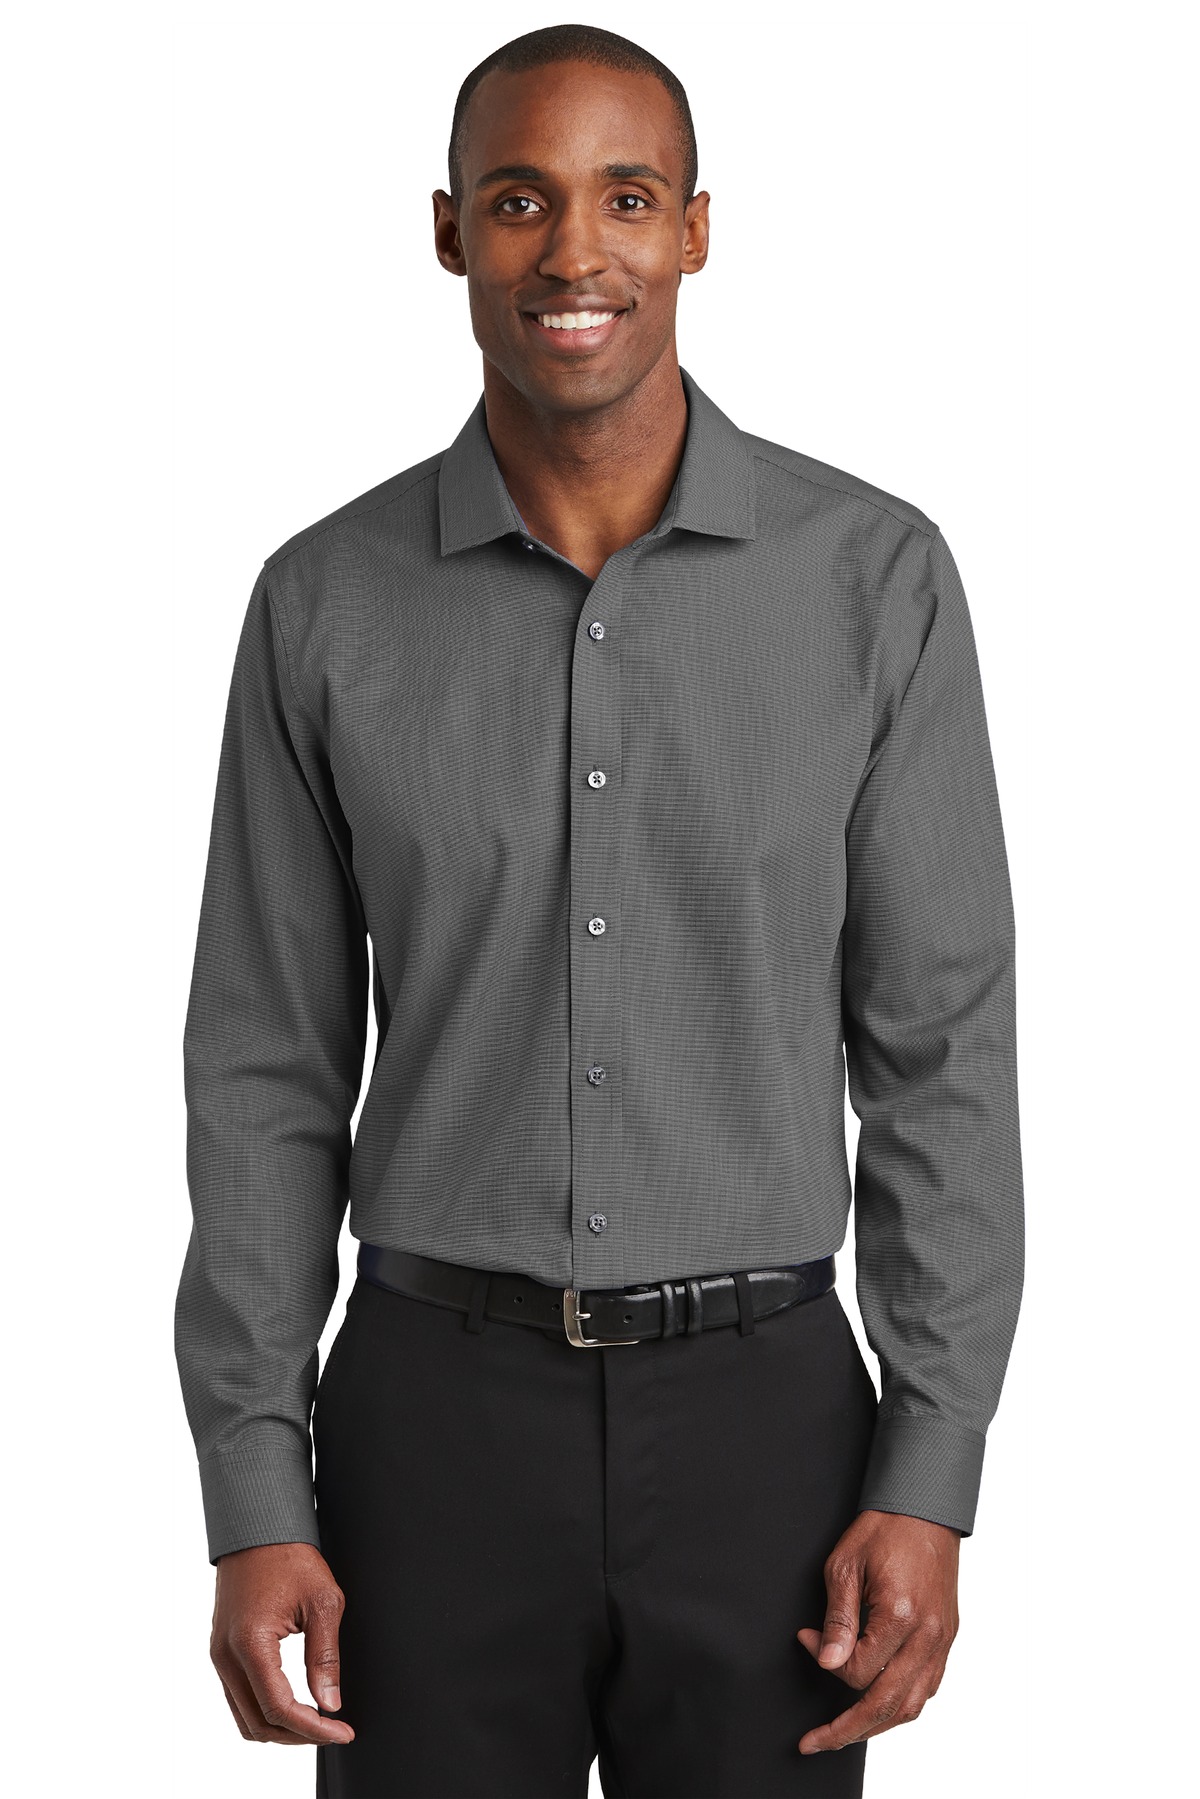 Red House Slim Fit Nailhead Non-Iron Shirt-Red House